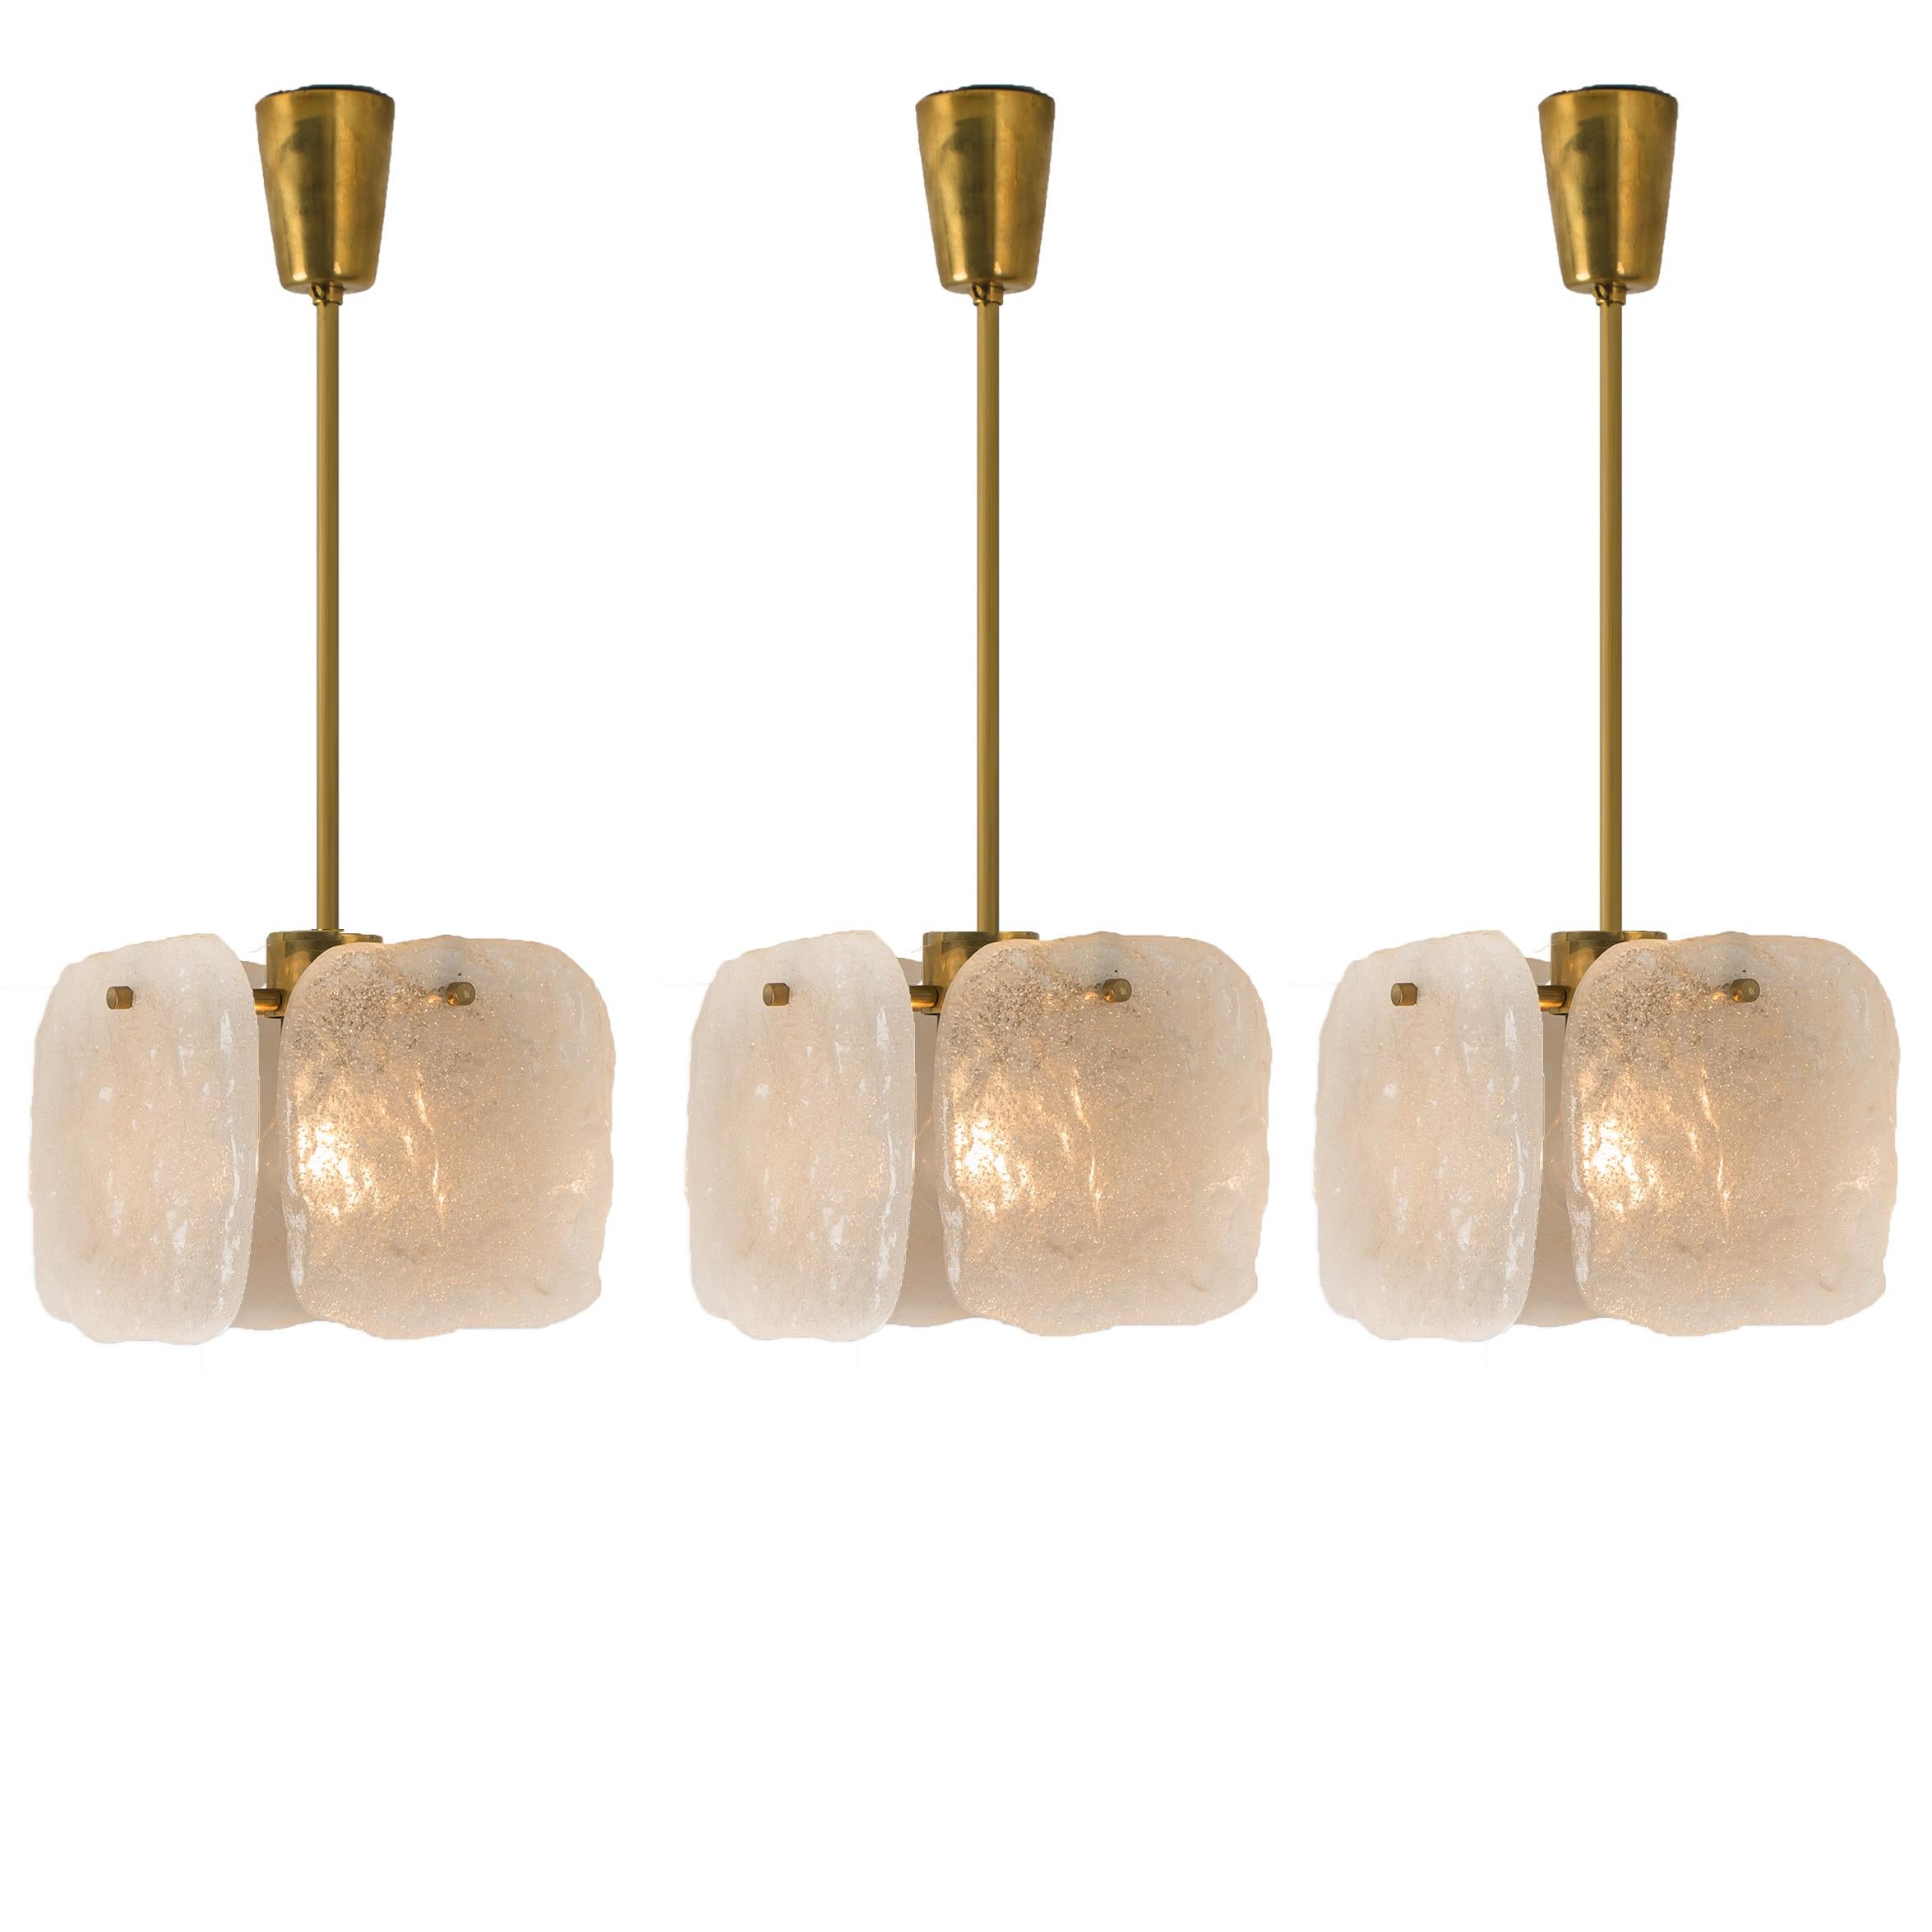 One of Three Ice Glass Pendant Lights from J.T. Kalmar, 1960s For Sale 5